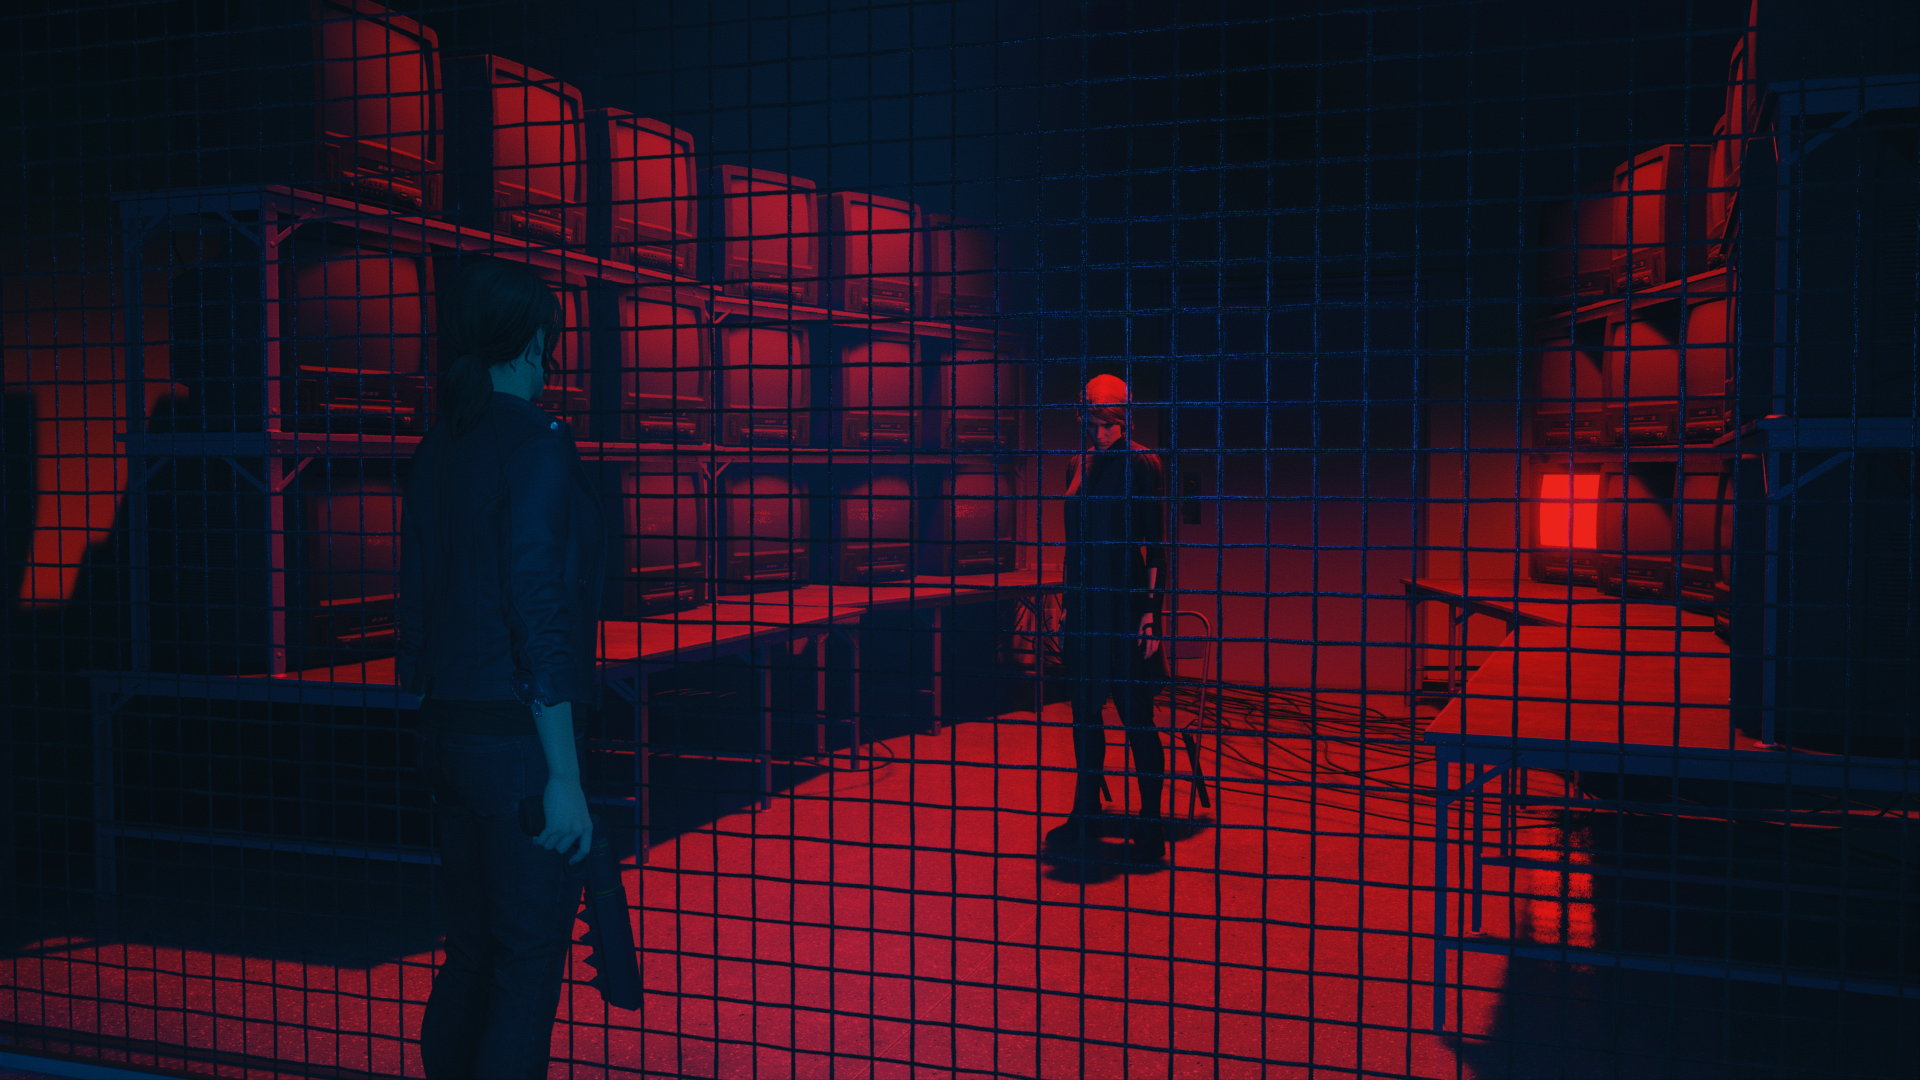 The player looking at a mirror version of herself, standing in a red-lit room.